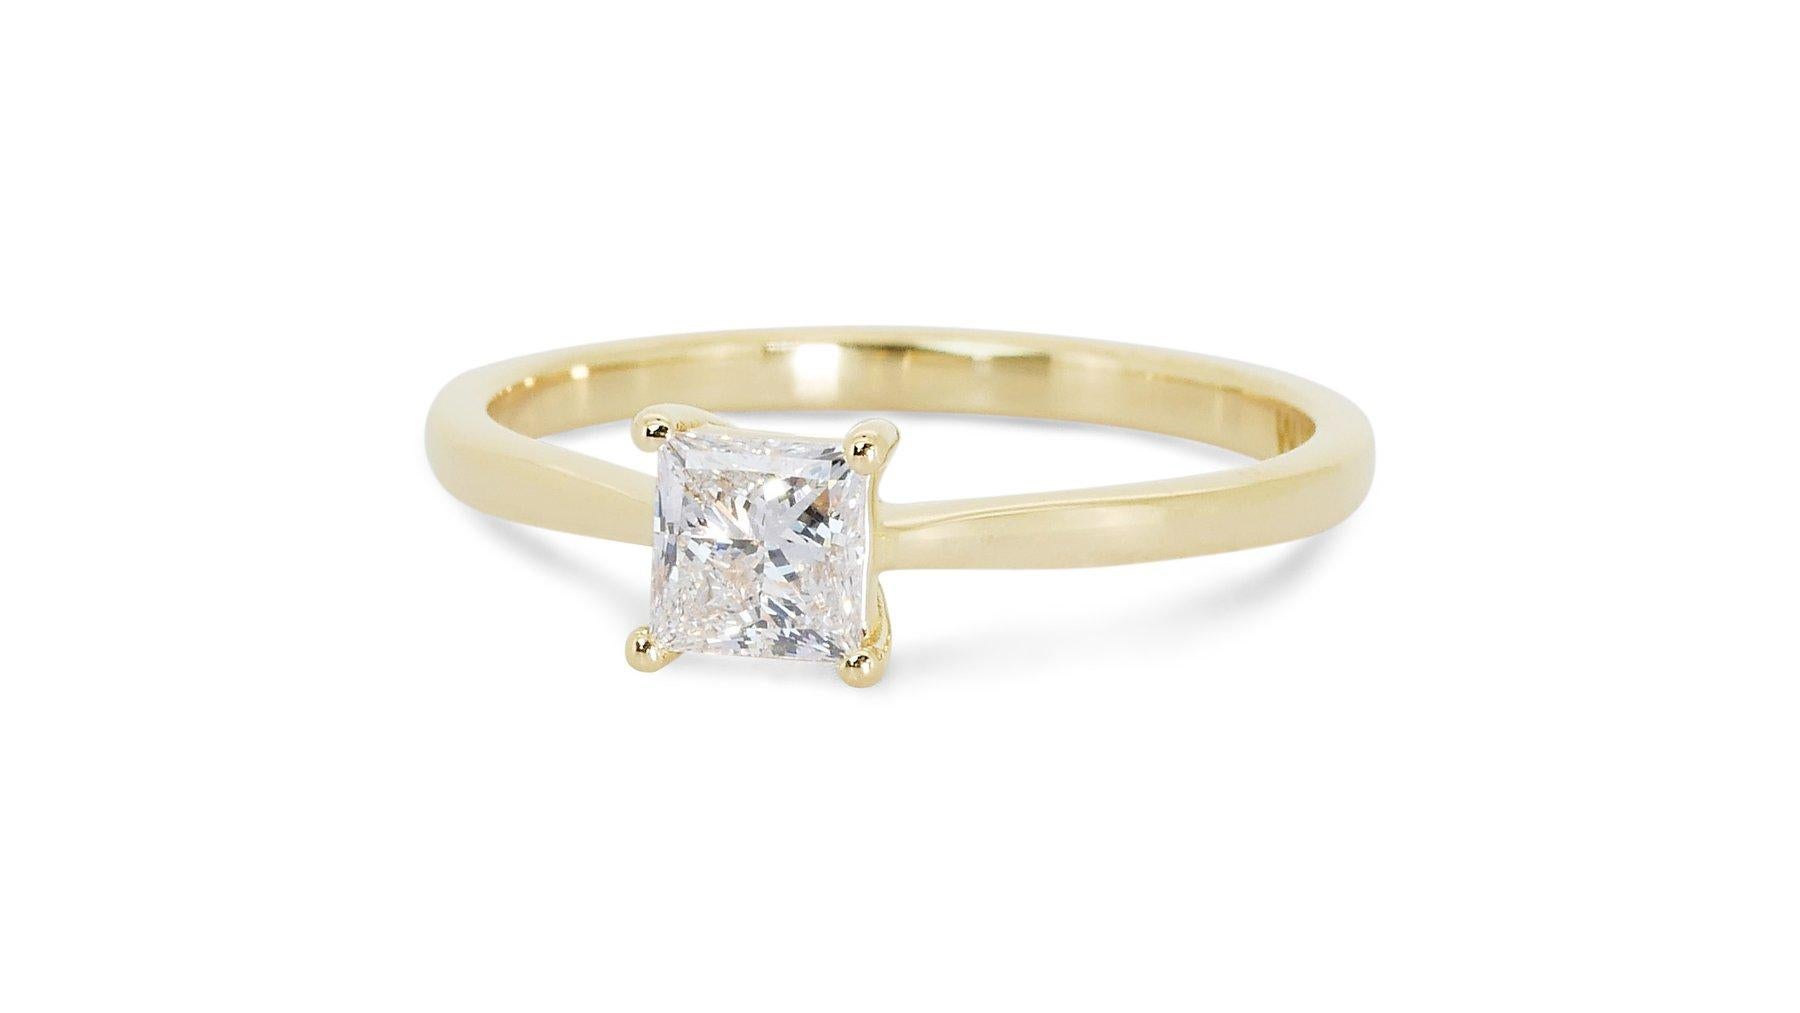 Brilliant Cut Splendid 18K Yellow Gold Solitaire Diamond Ring with 0.90ct - GIA Certified For Sale